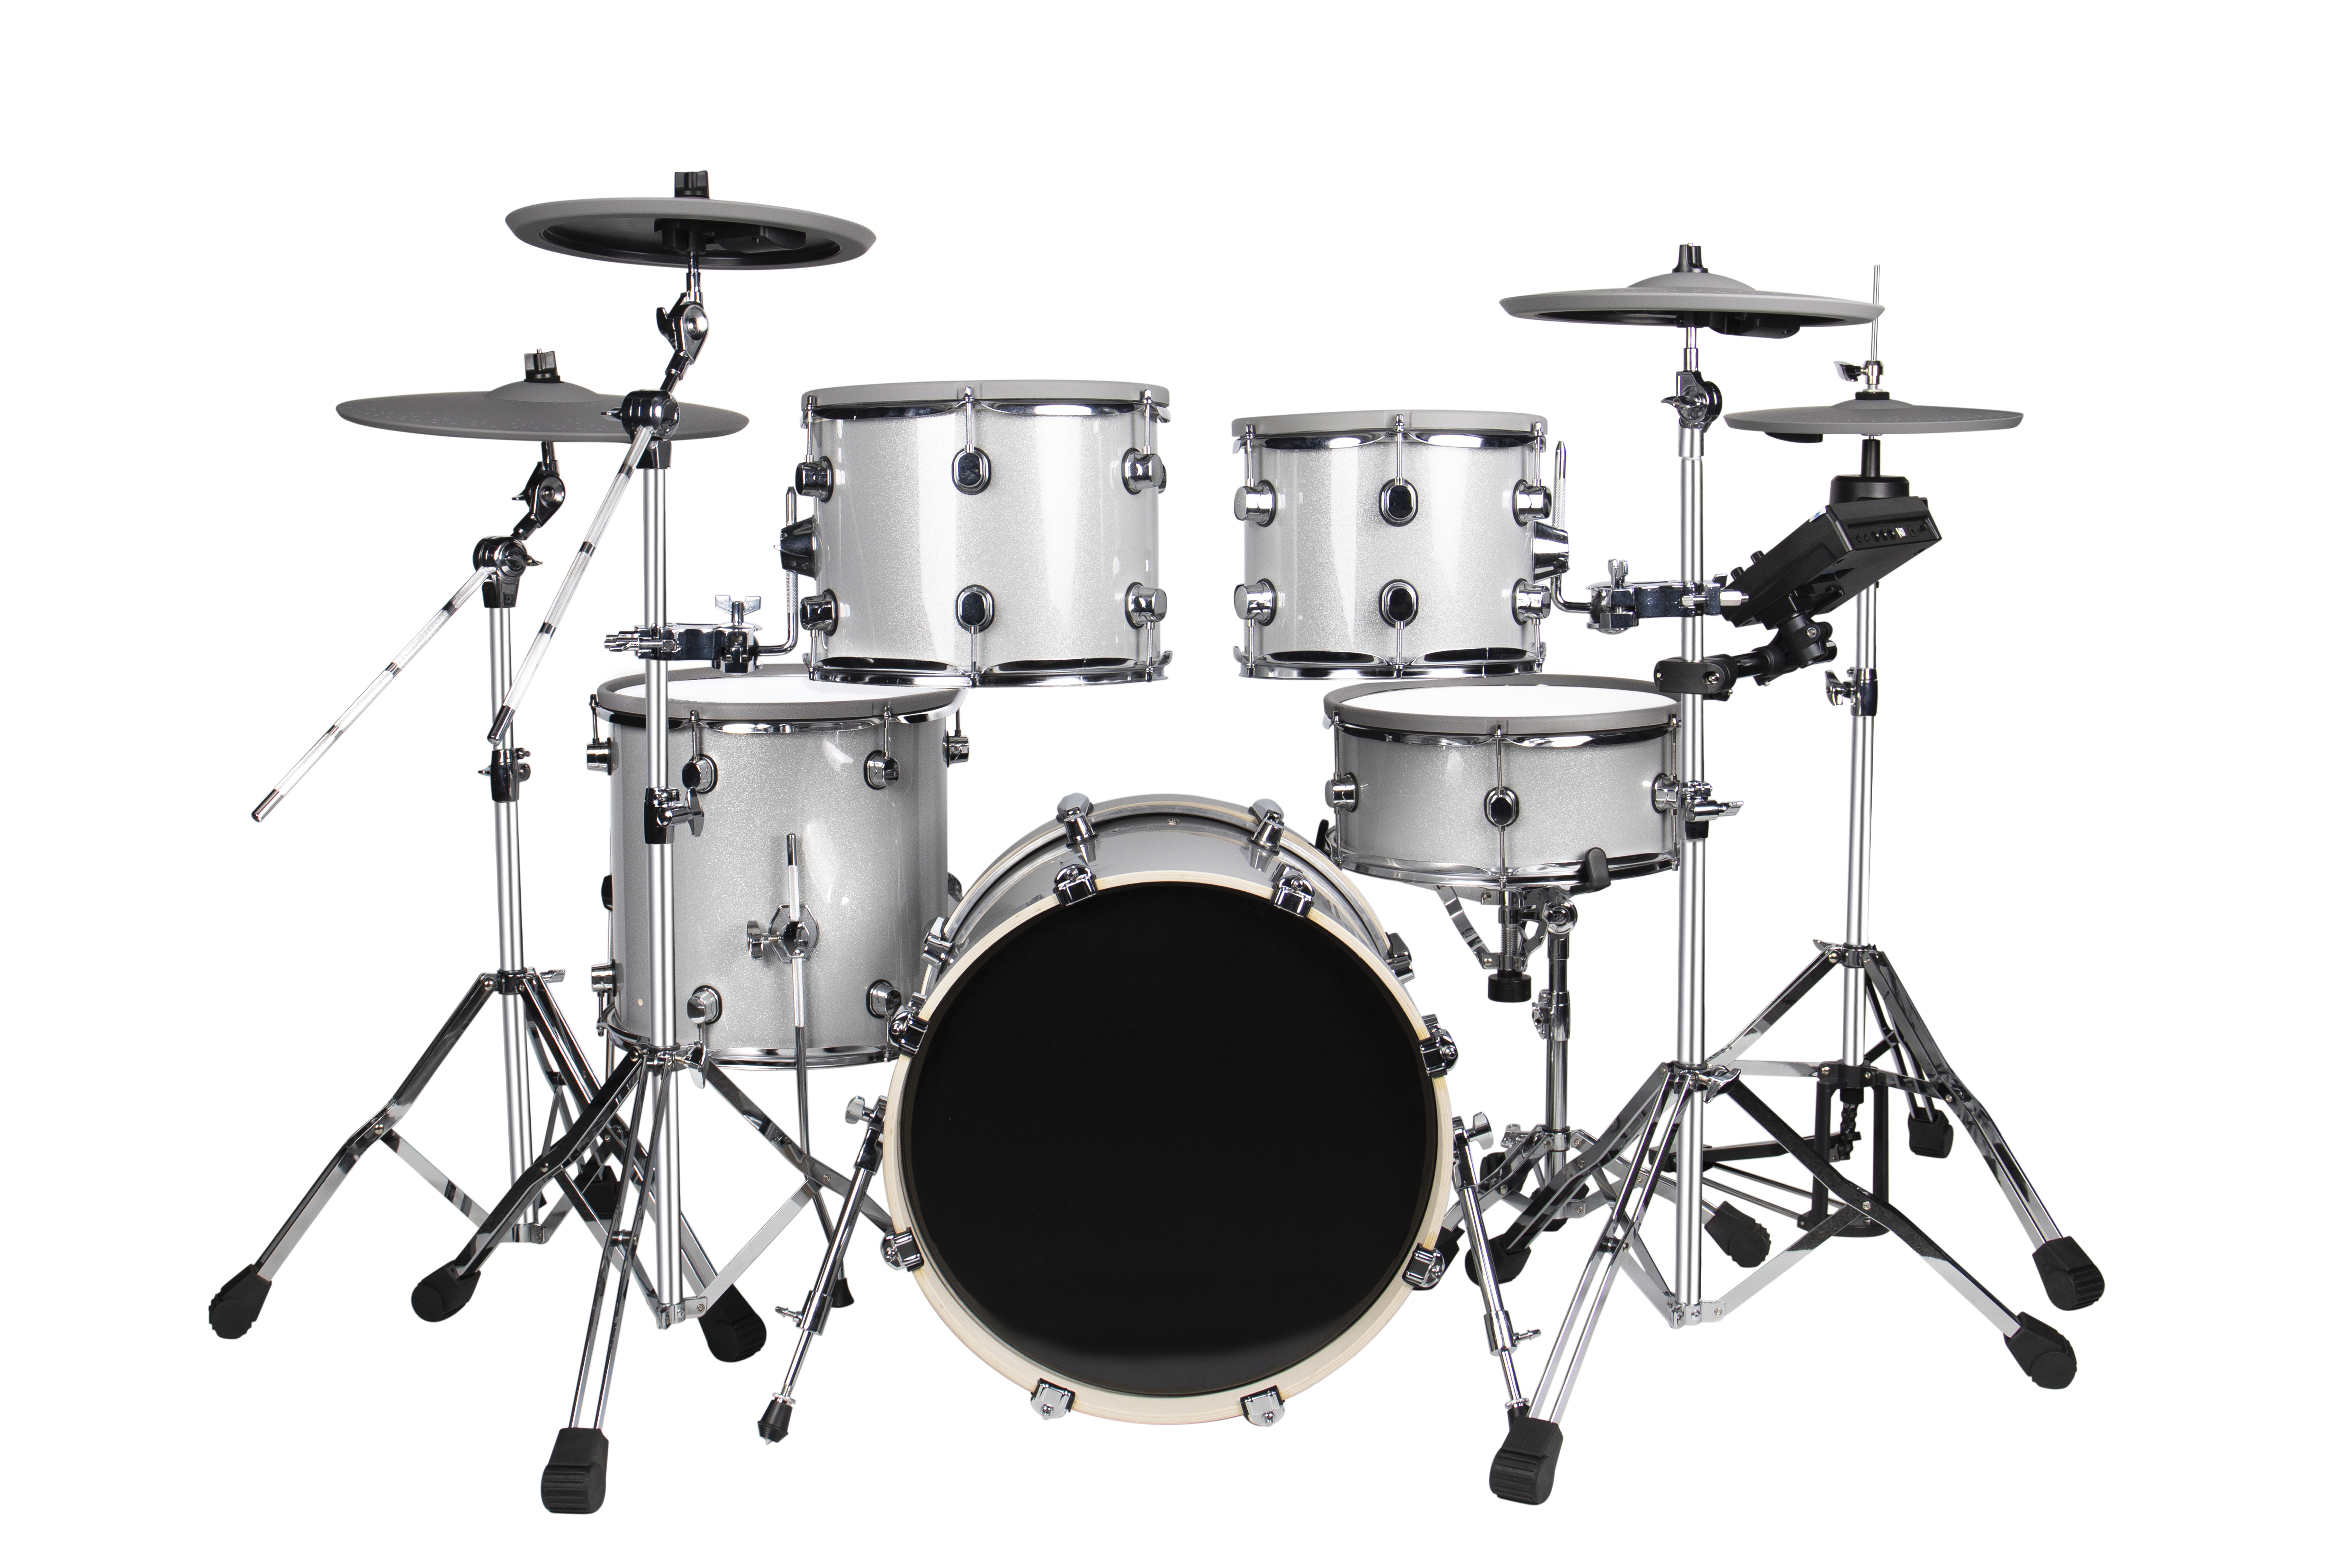 MOINNG high quality popular electronic drums set